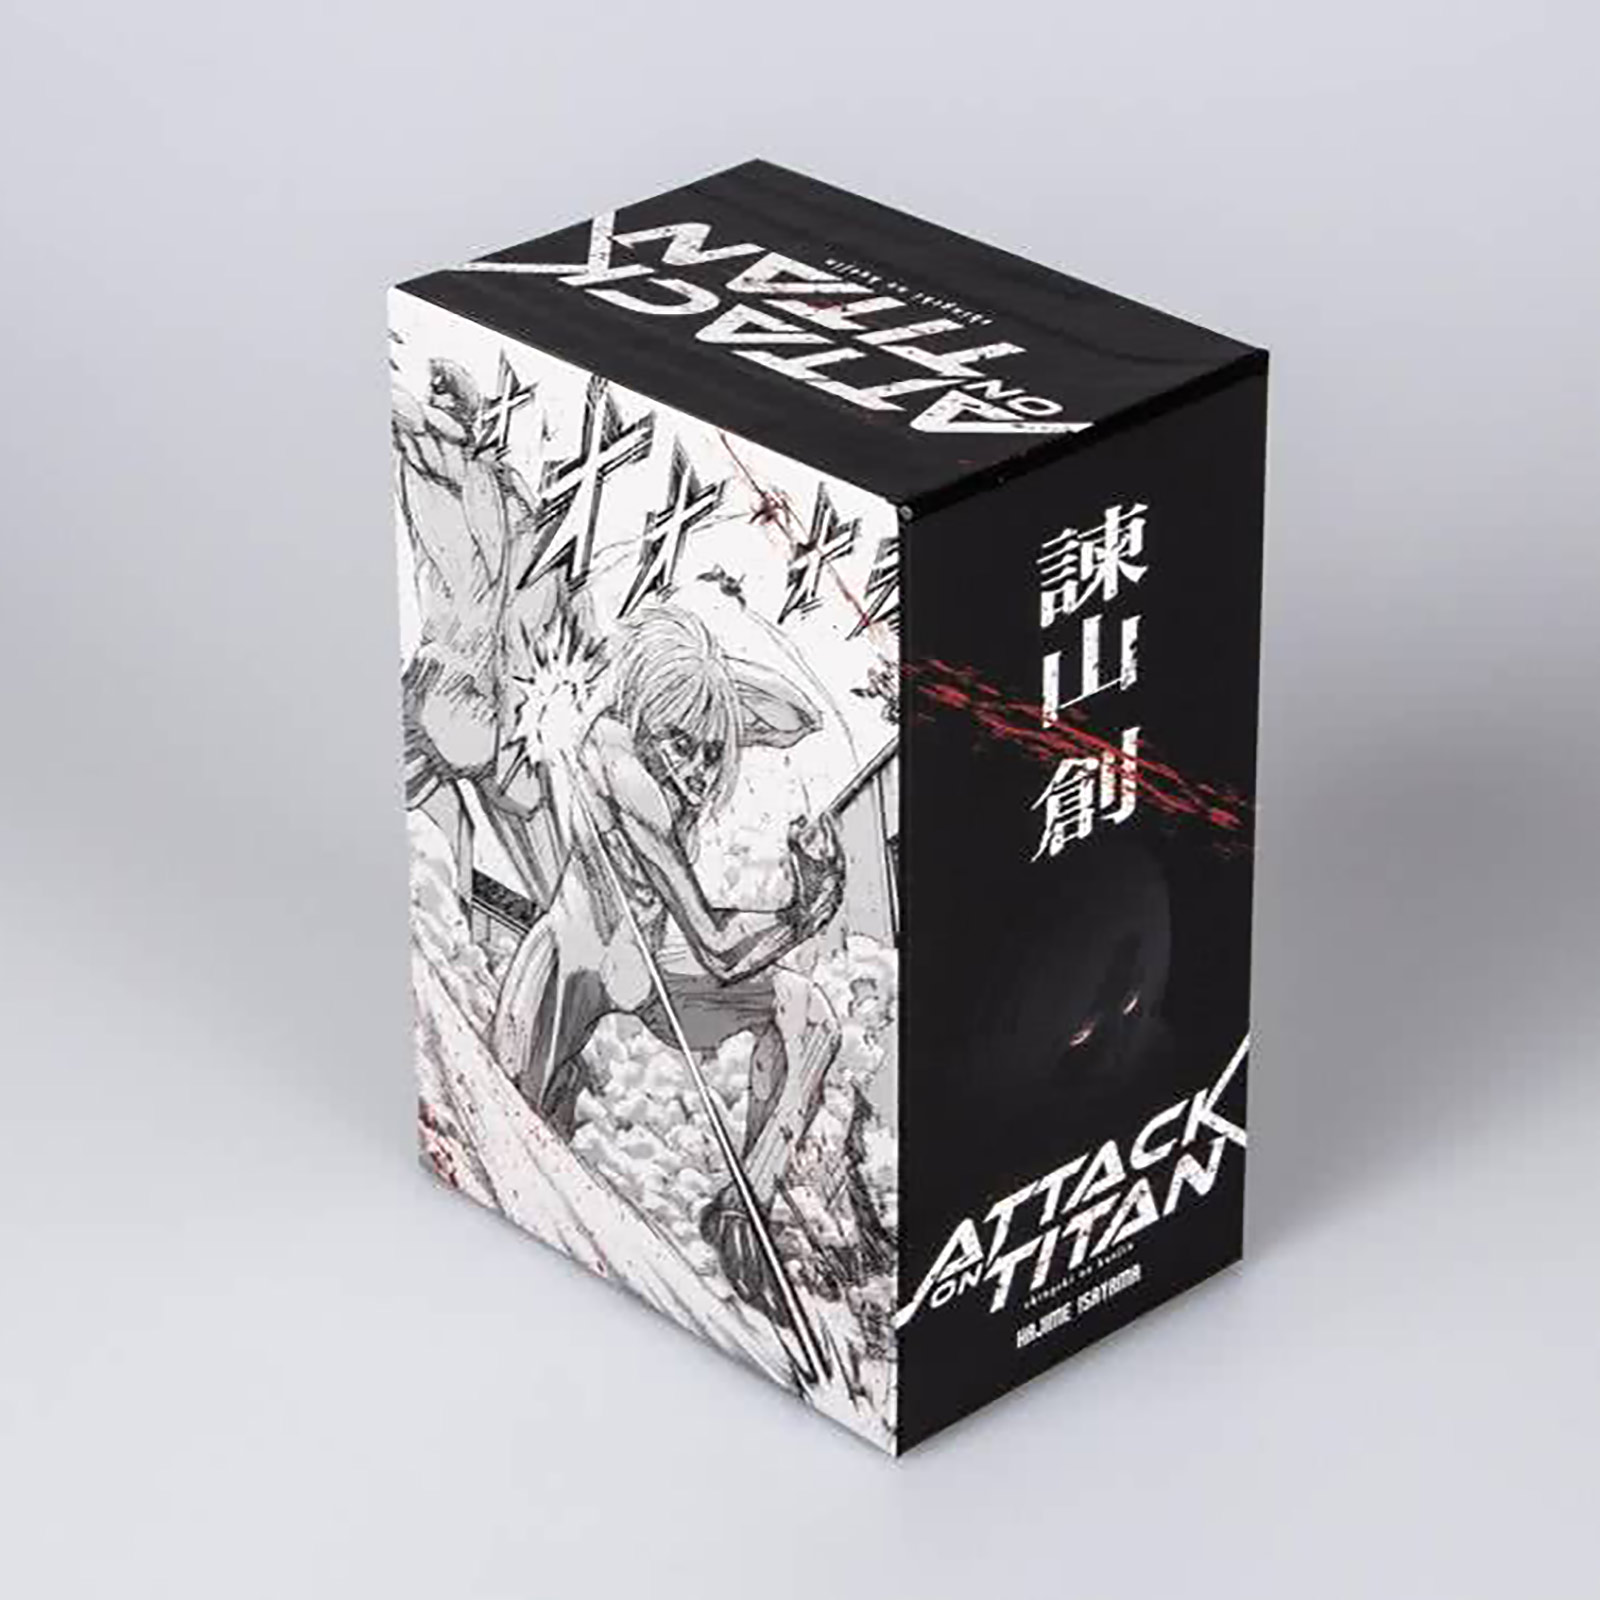 Attack on Titan - Volume 34 in Collector's Box with Extra